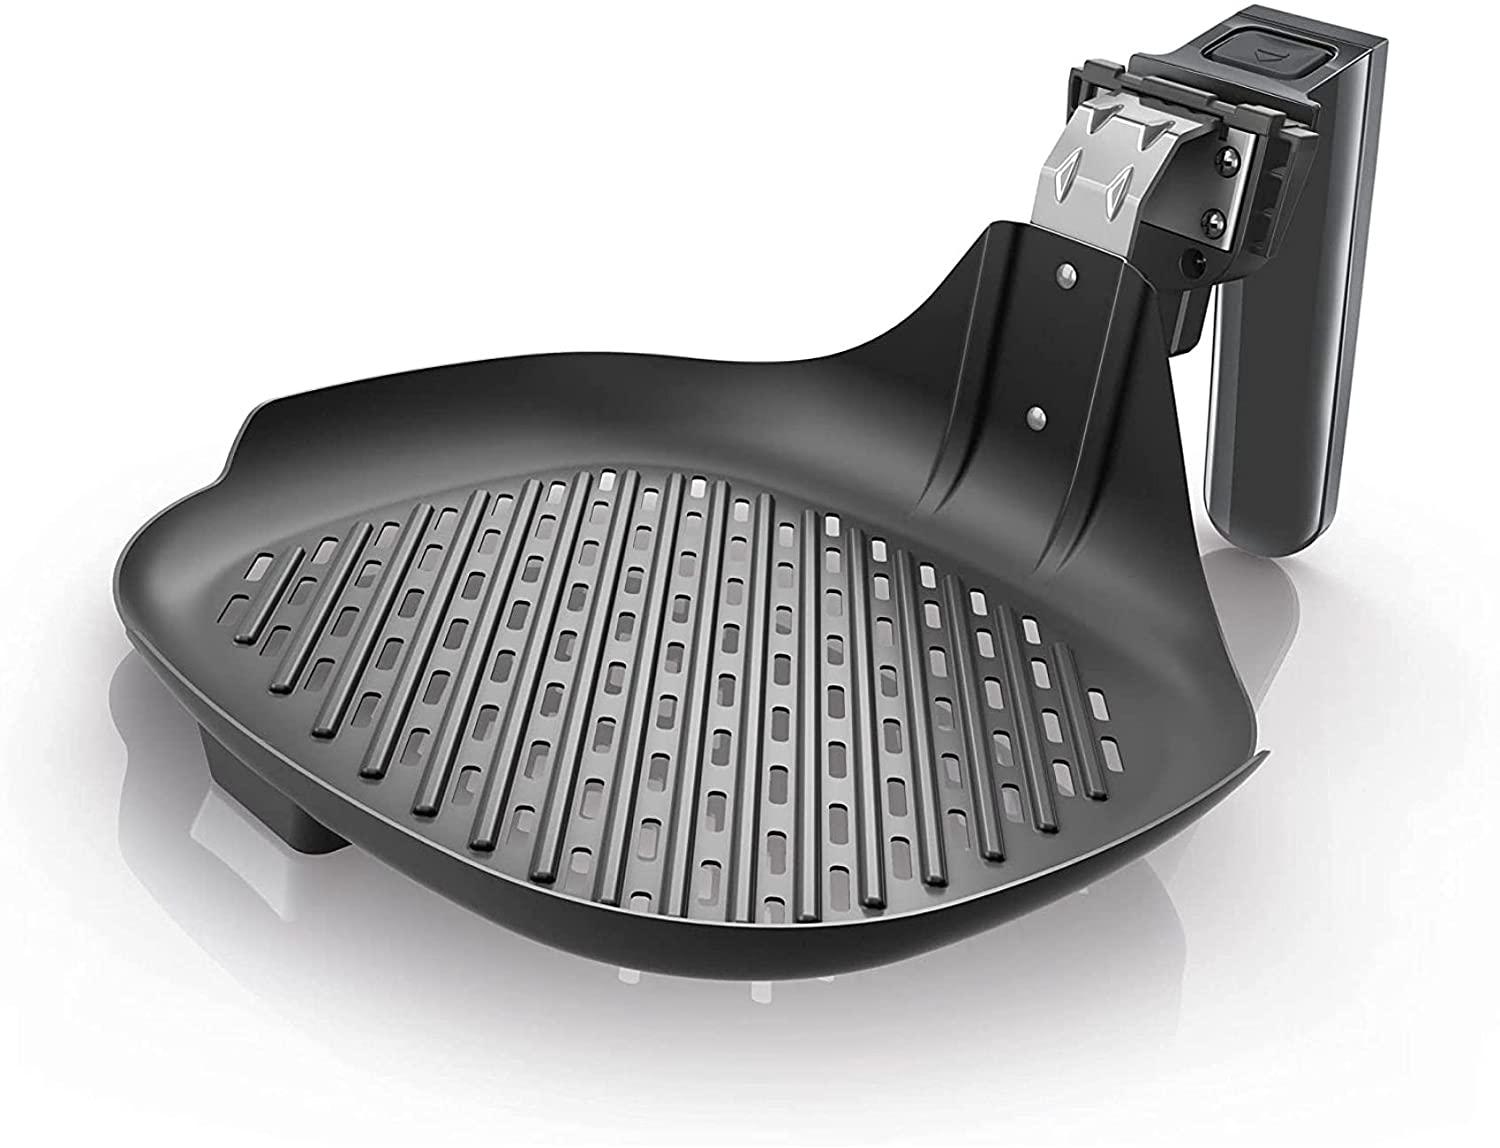 Philips Kitchen HD9910 Fry Grill Pan for $9.98